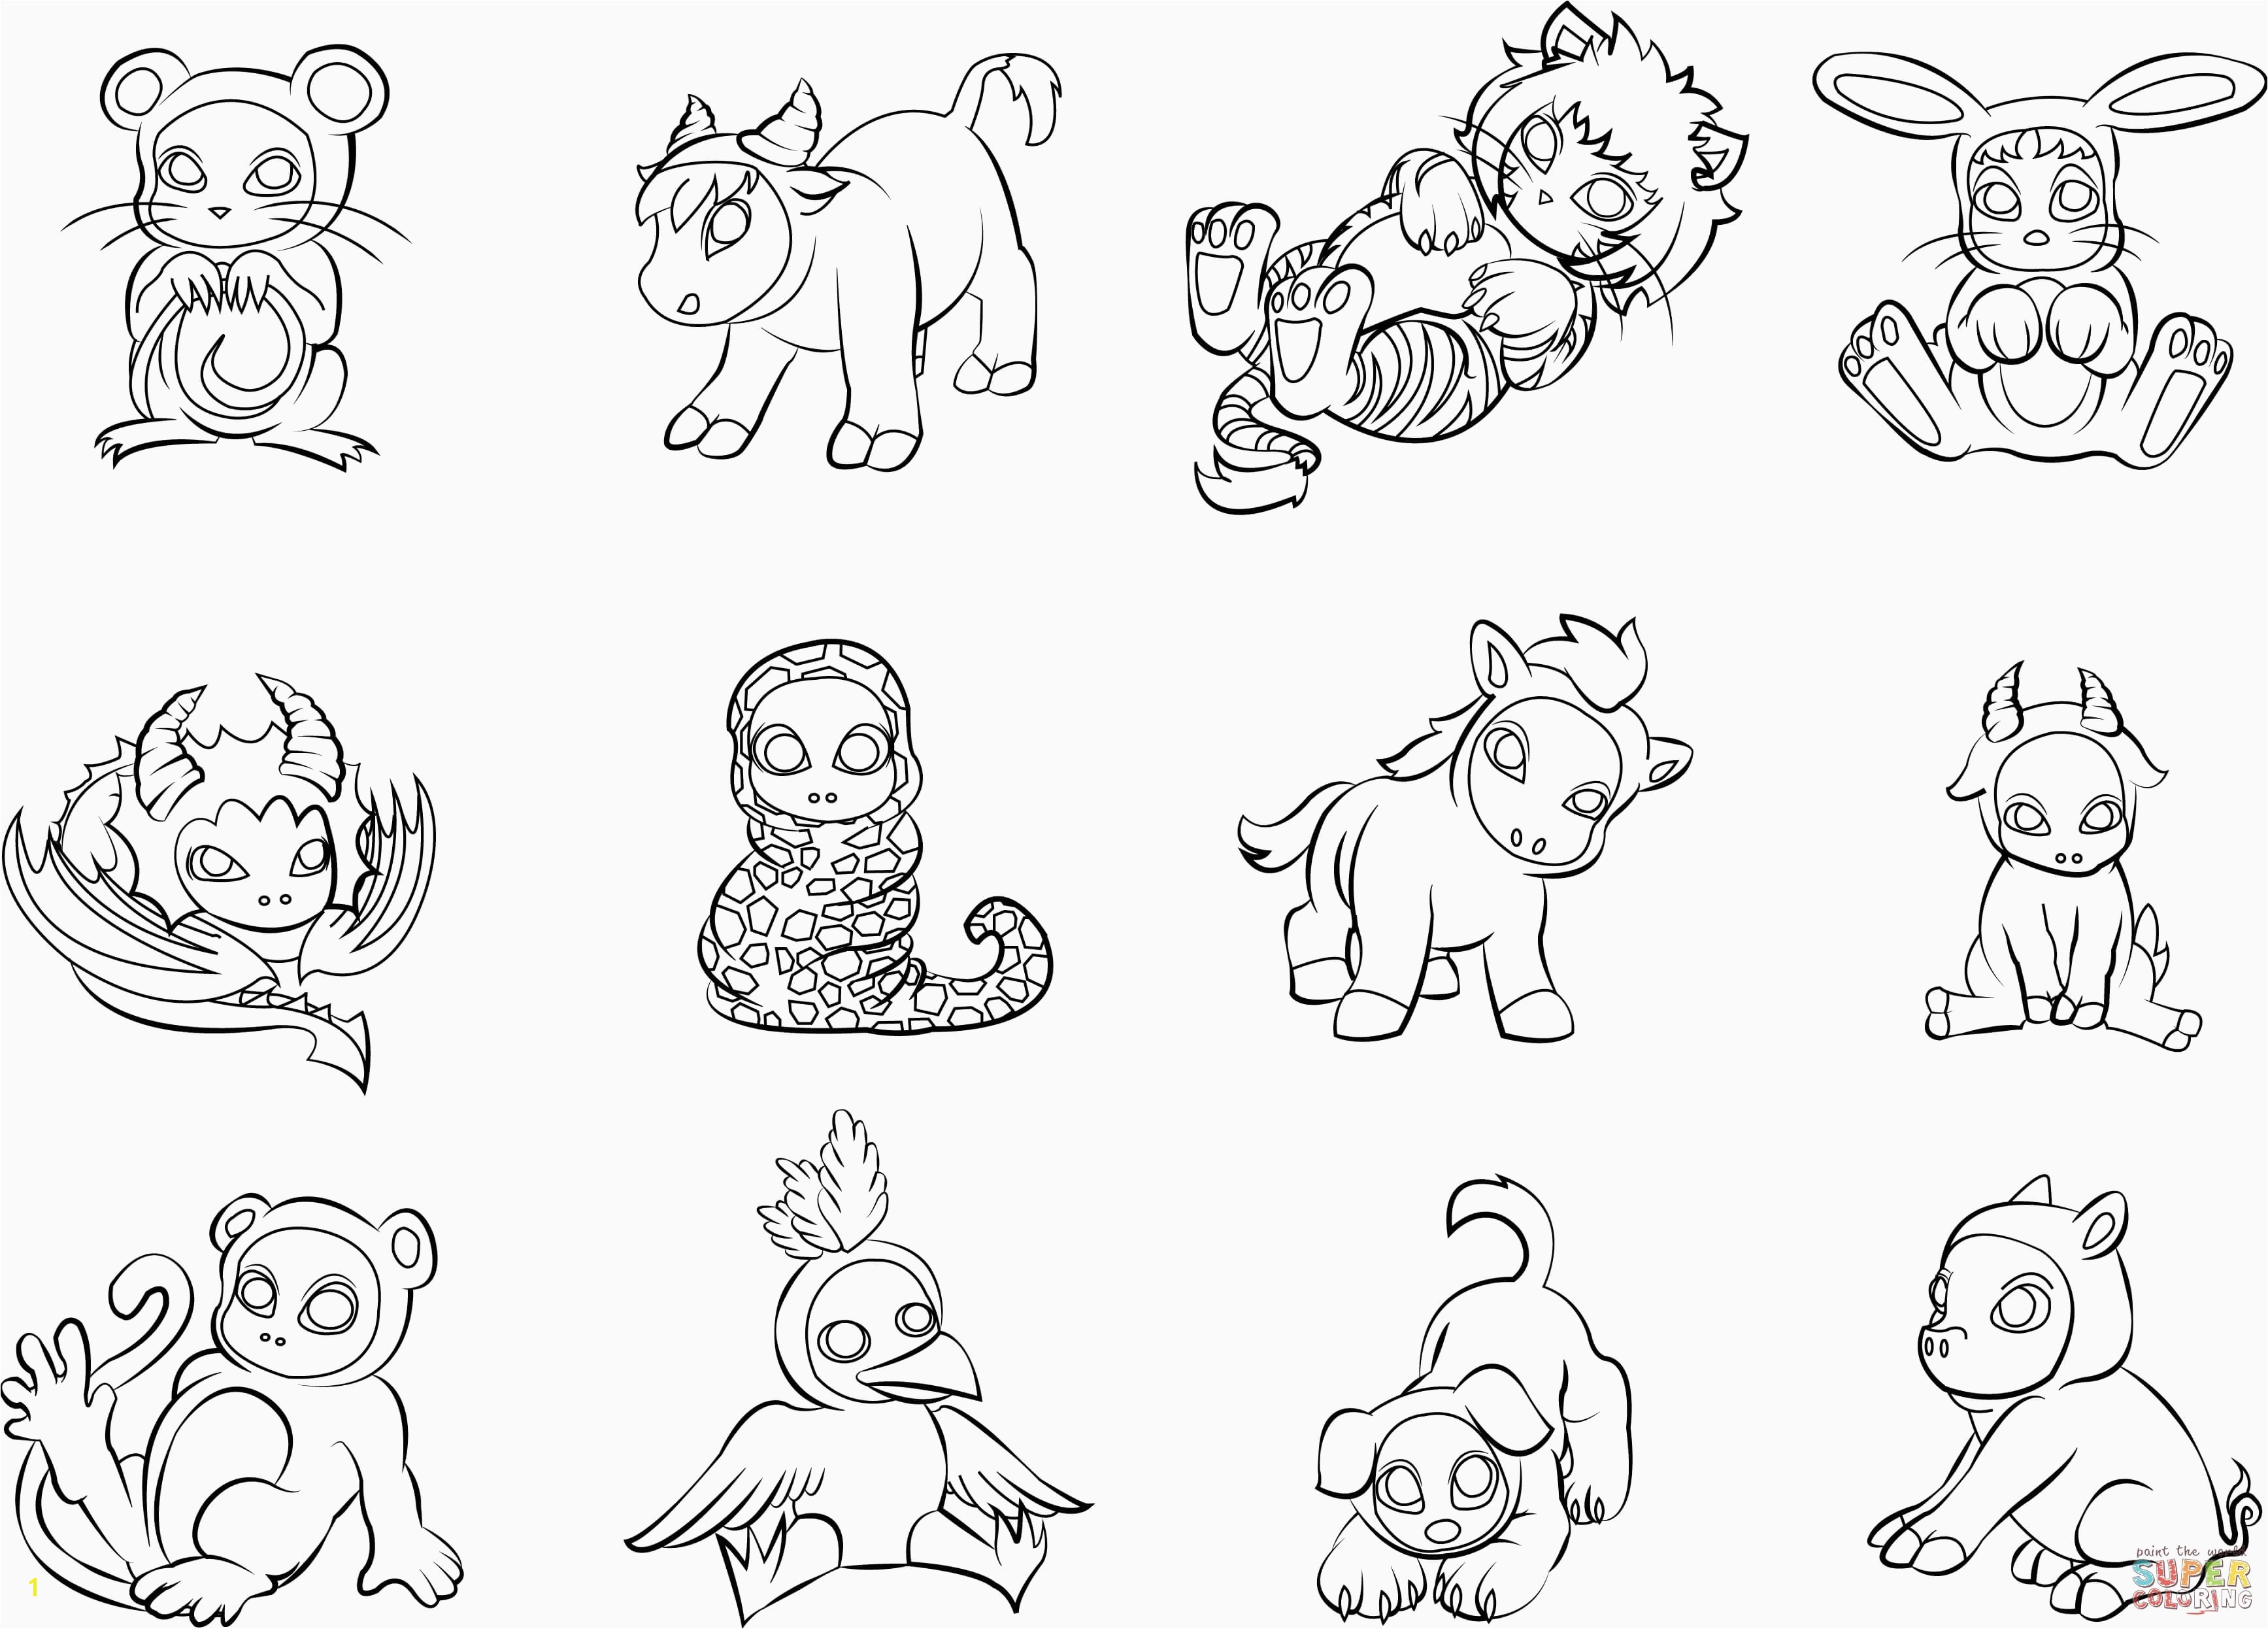 Super Cute Animal Coloring Pages Best Cute Baby Animal Coloring Pages Elegant New Od Dog Coloring